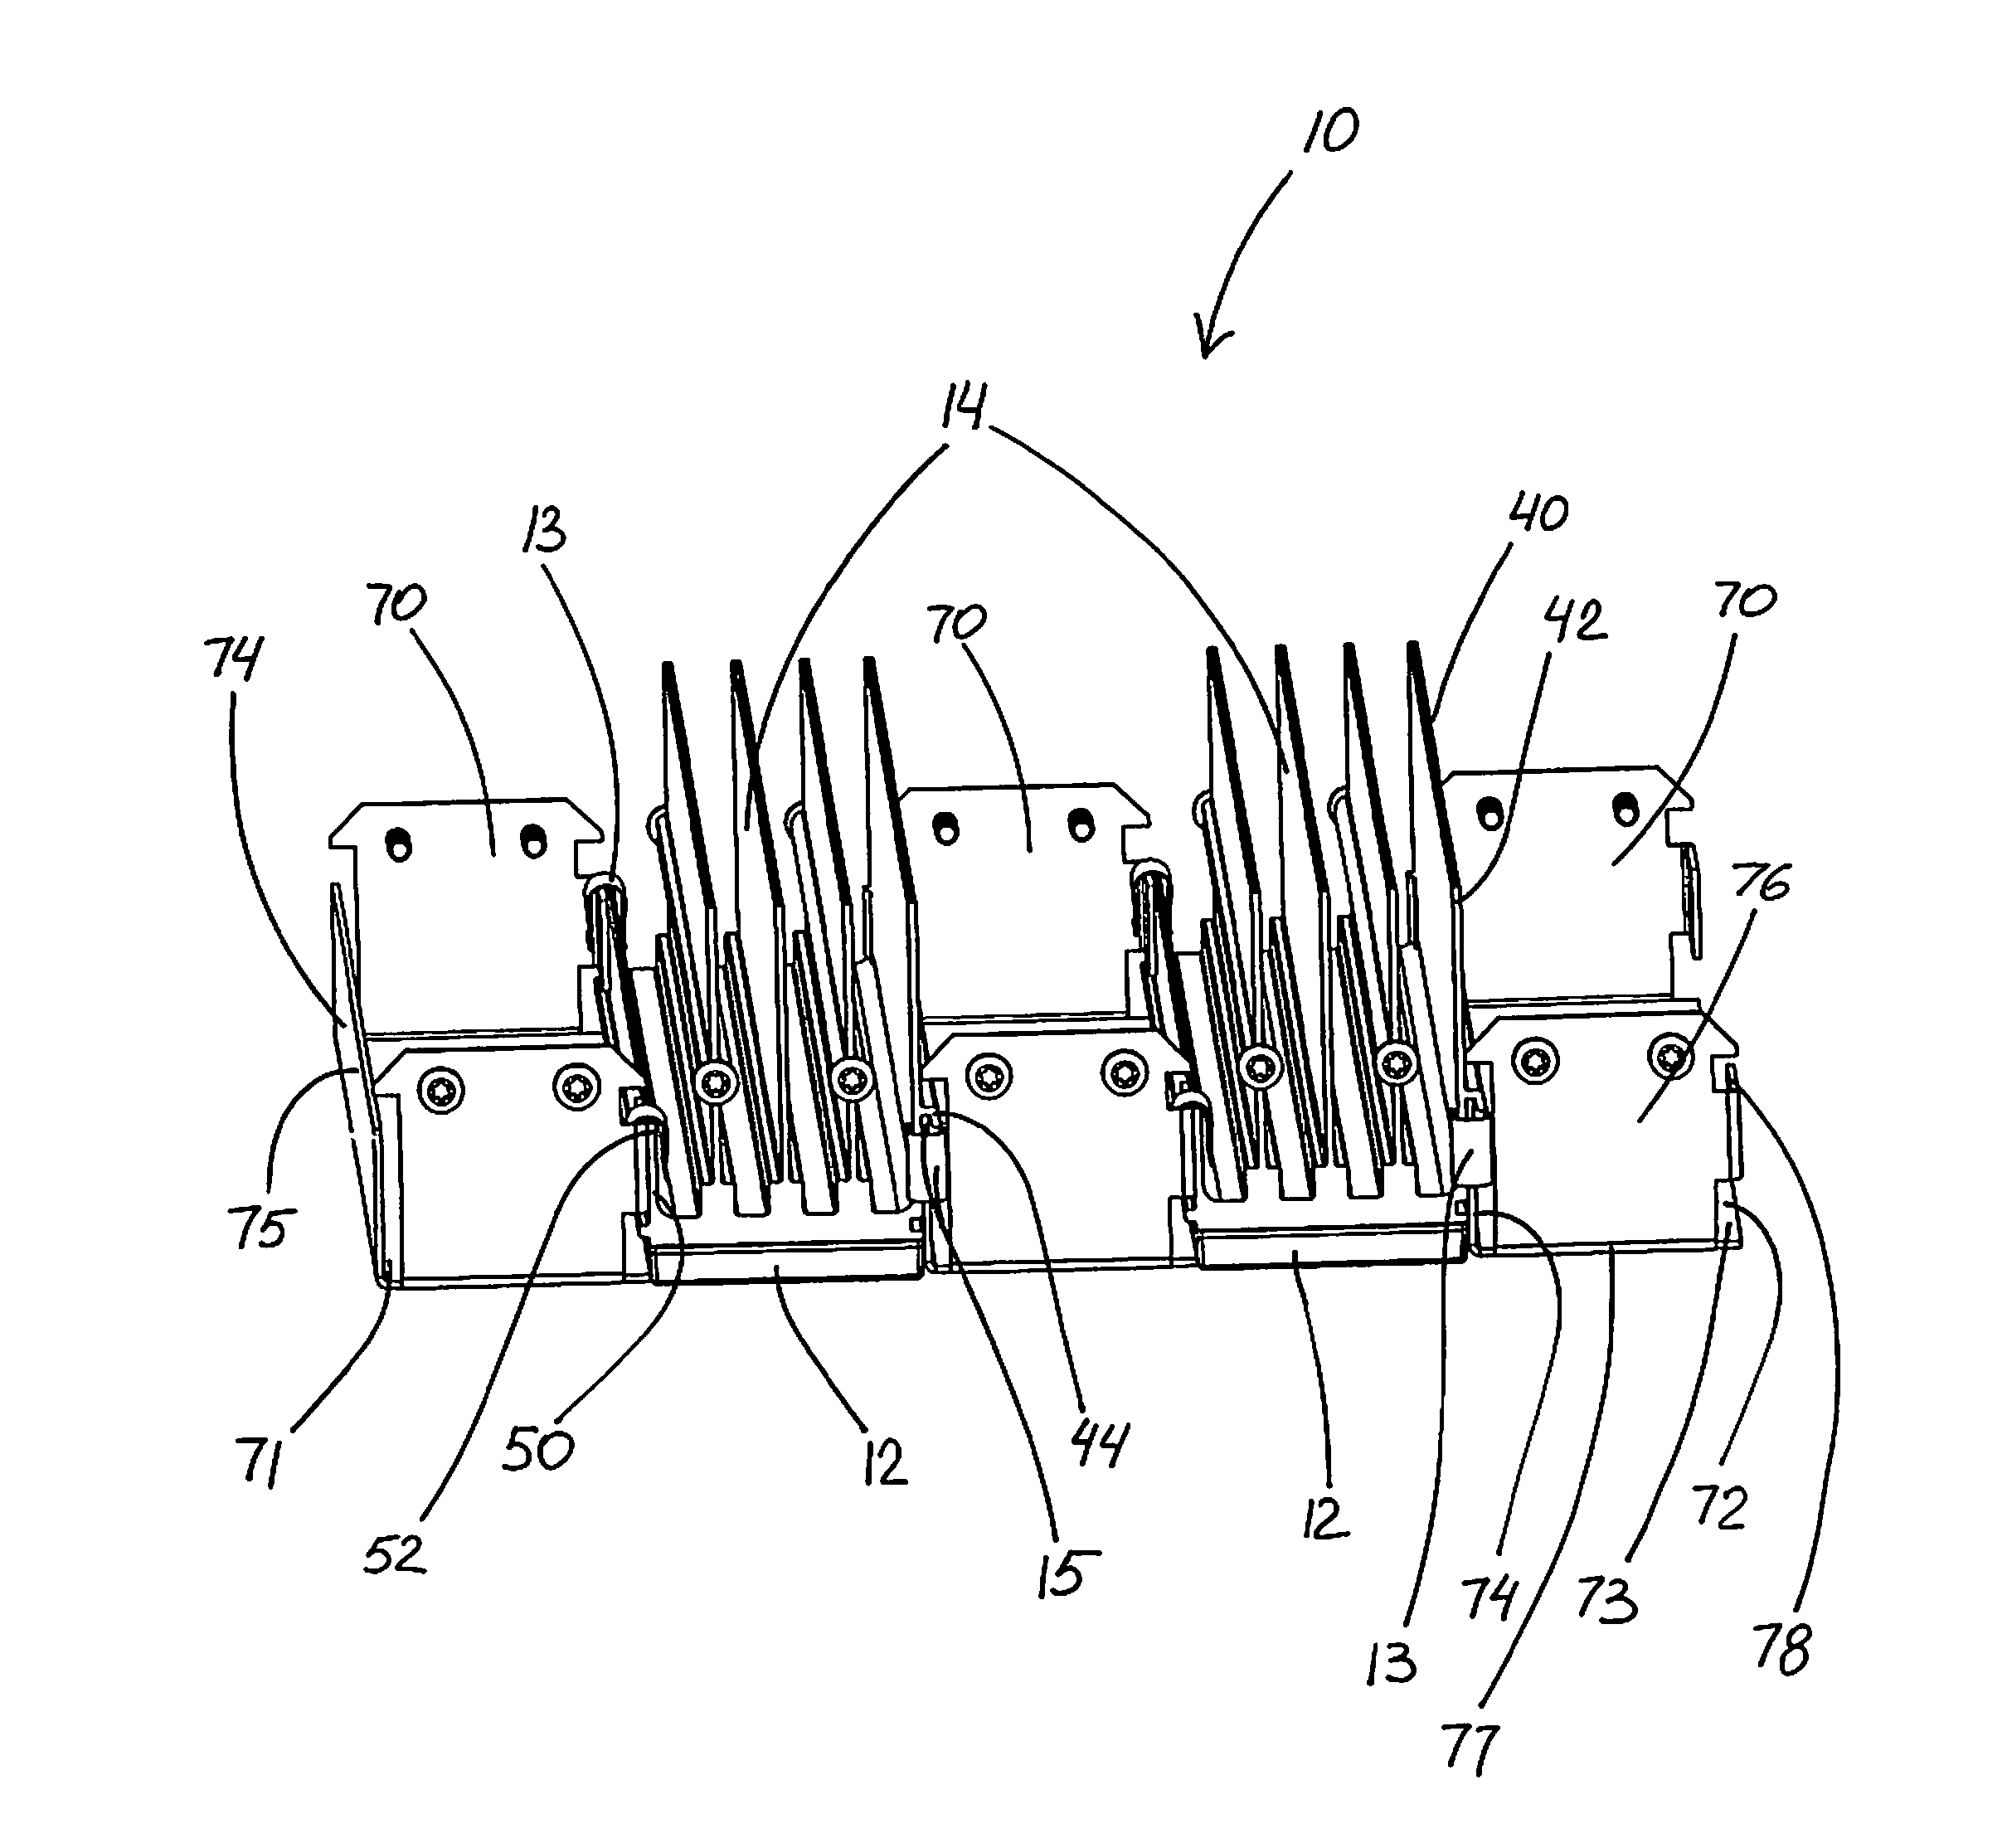 Modular LED unit incorporating interconnected heat sinks configured to mount and hold adjacent LED modules